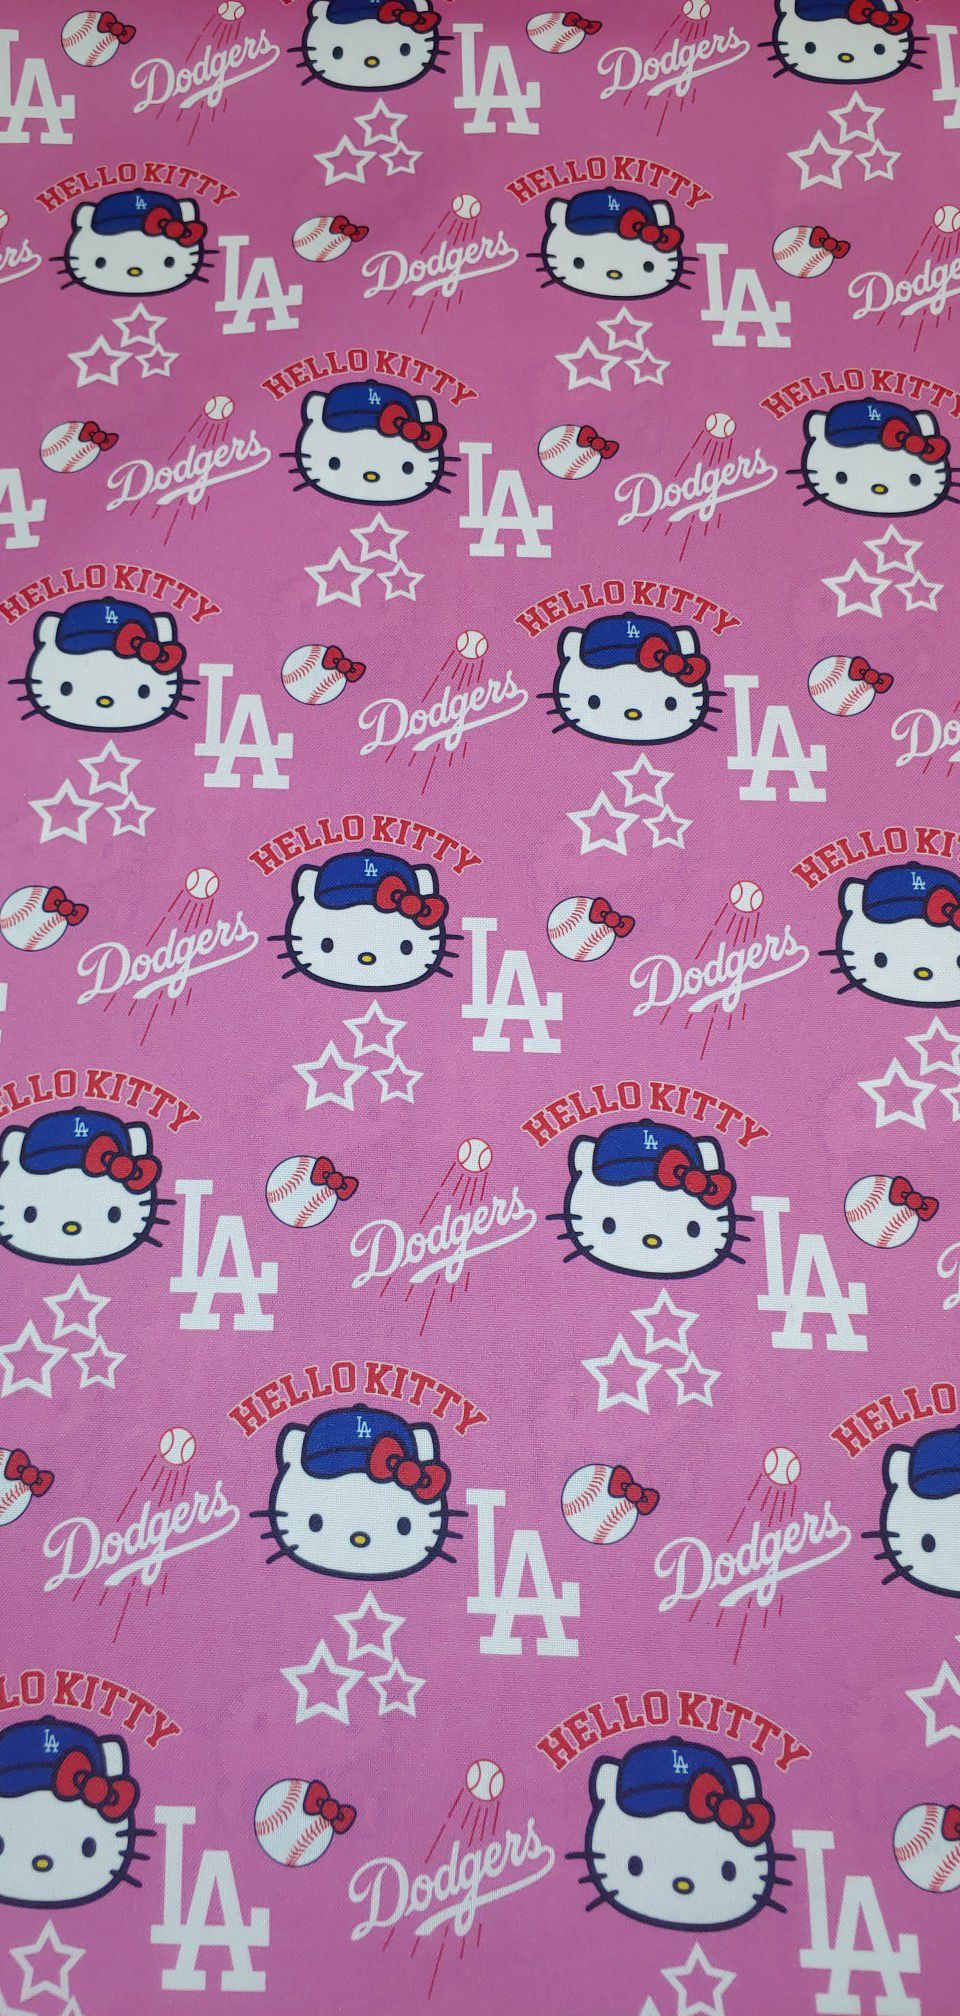 HELLO KITTY DODGERS FABRIC for Sale in City of Industry, CA - OfferUp